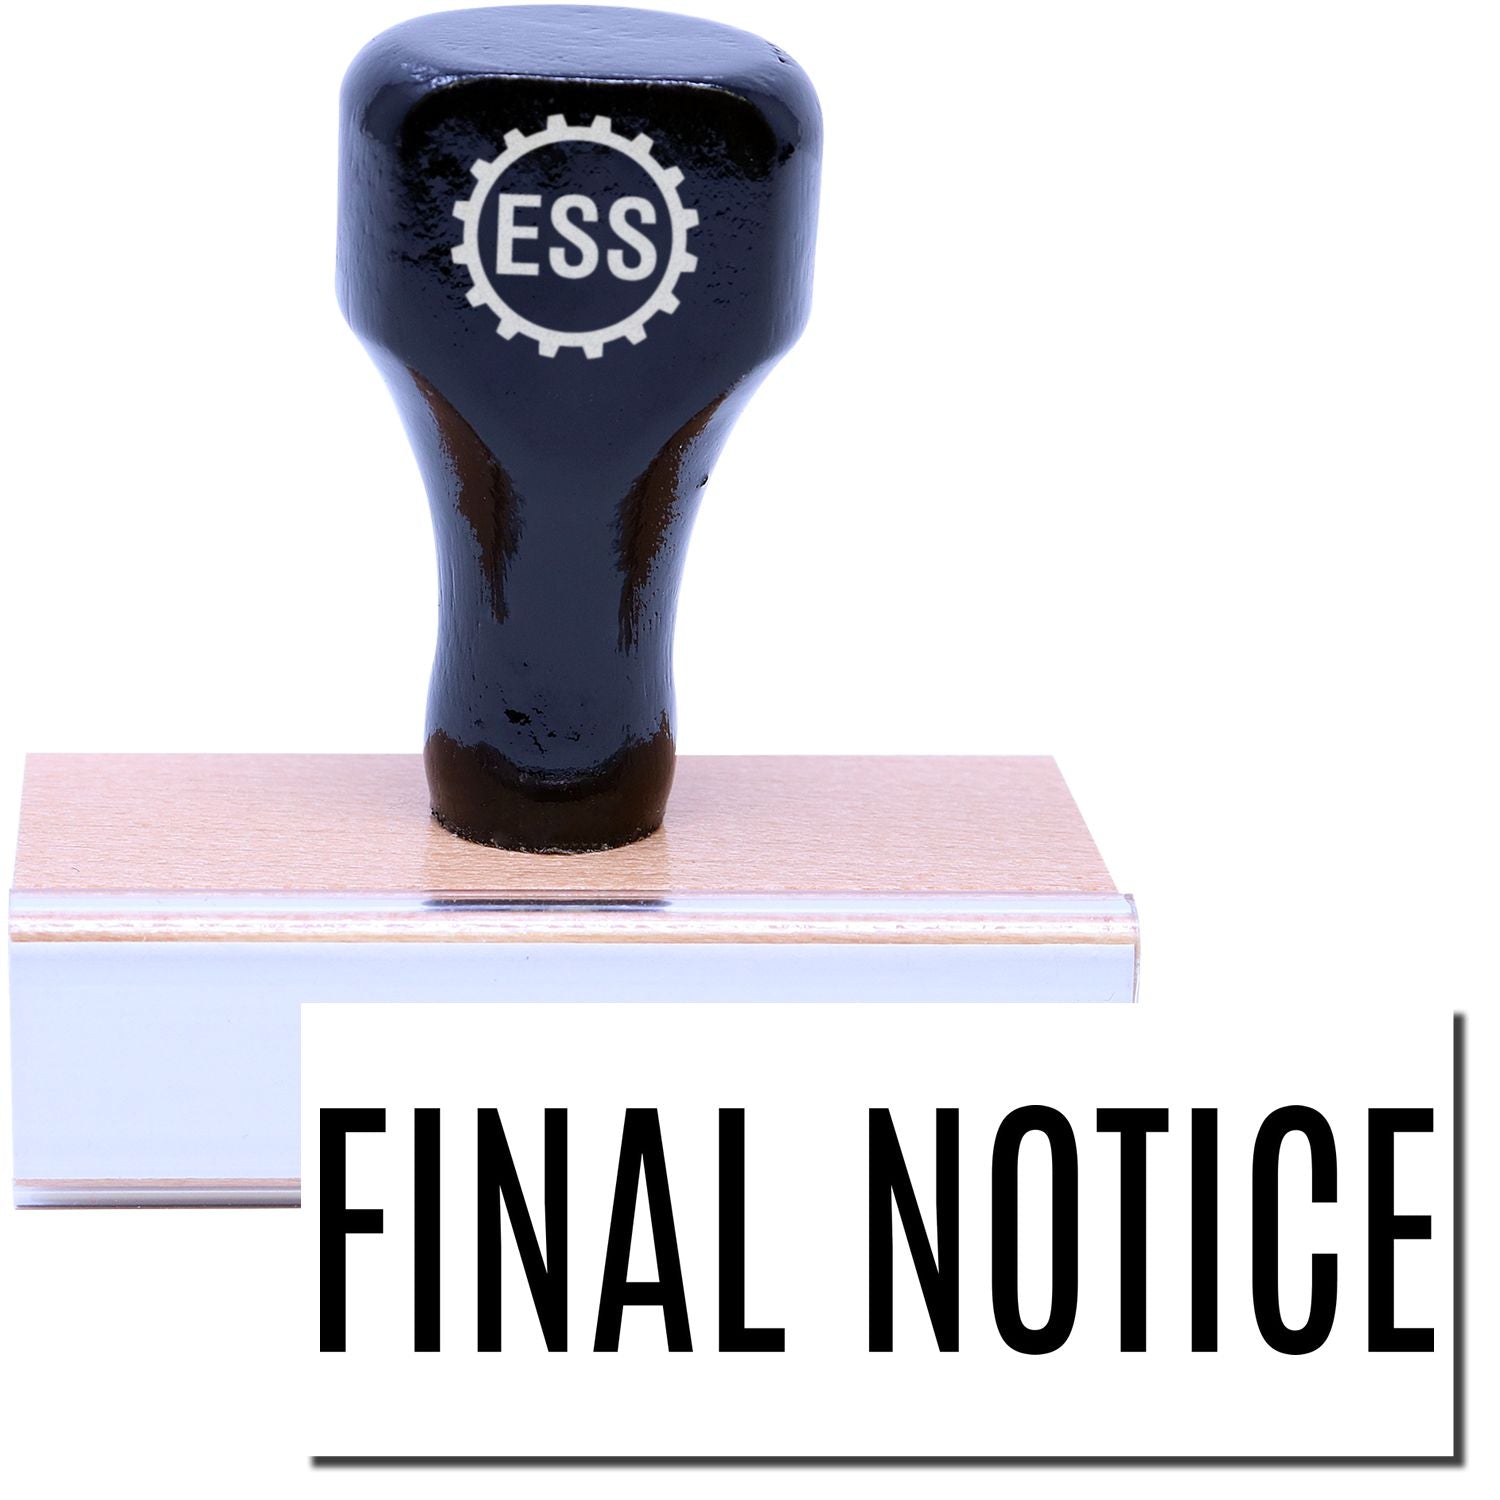 A stock office rubber stamp with a stamped image showing how the text "FINAL NOTICE" in a large narrow font is displayed after stamping.